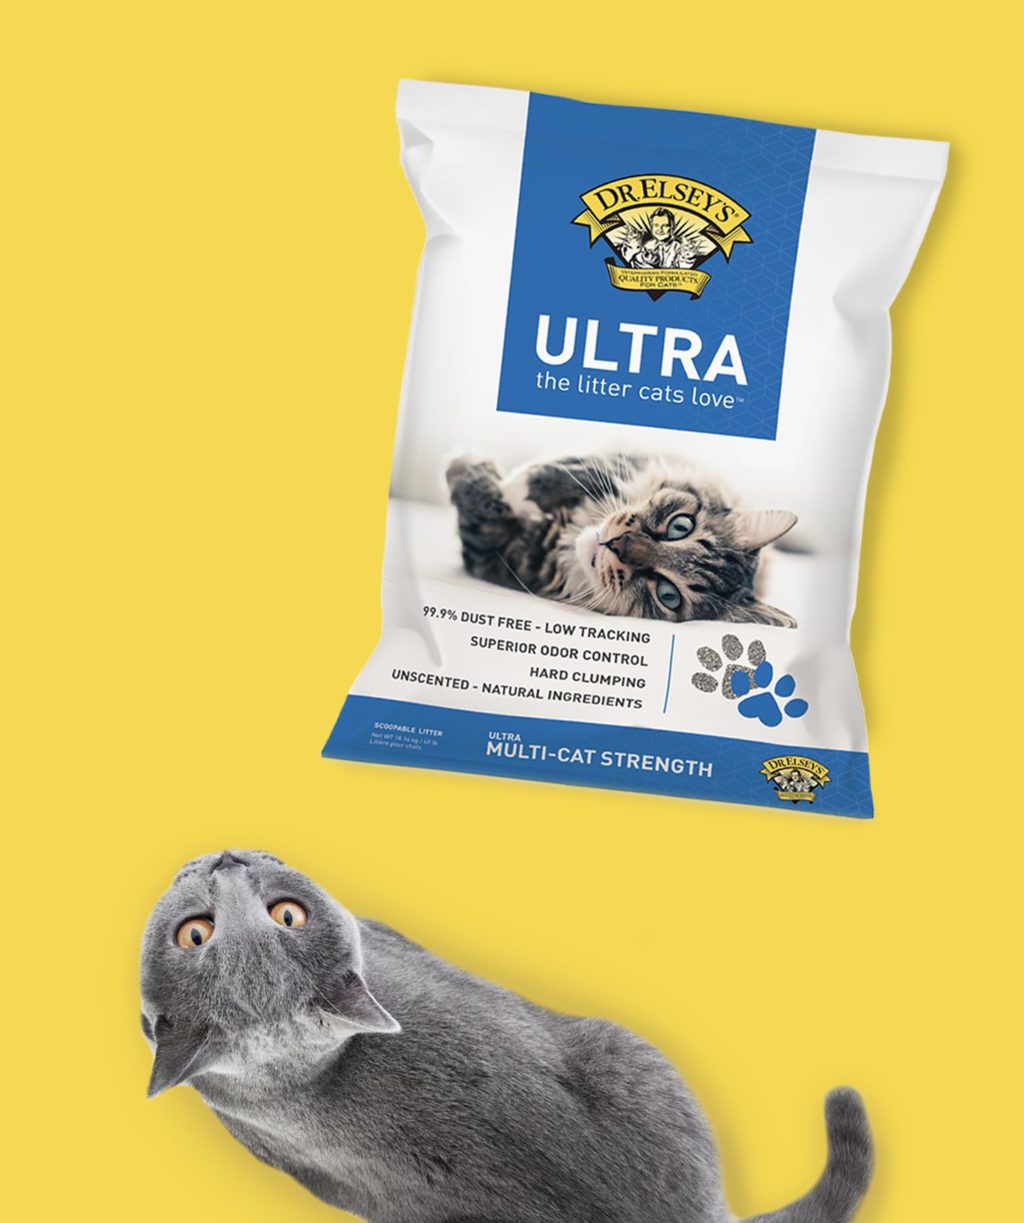 Dr. Elsey’s Quality Cat Litter and Cat Food Products for Cats